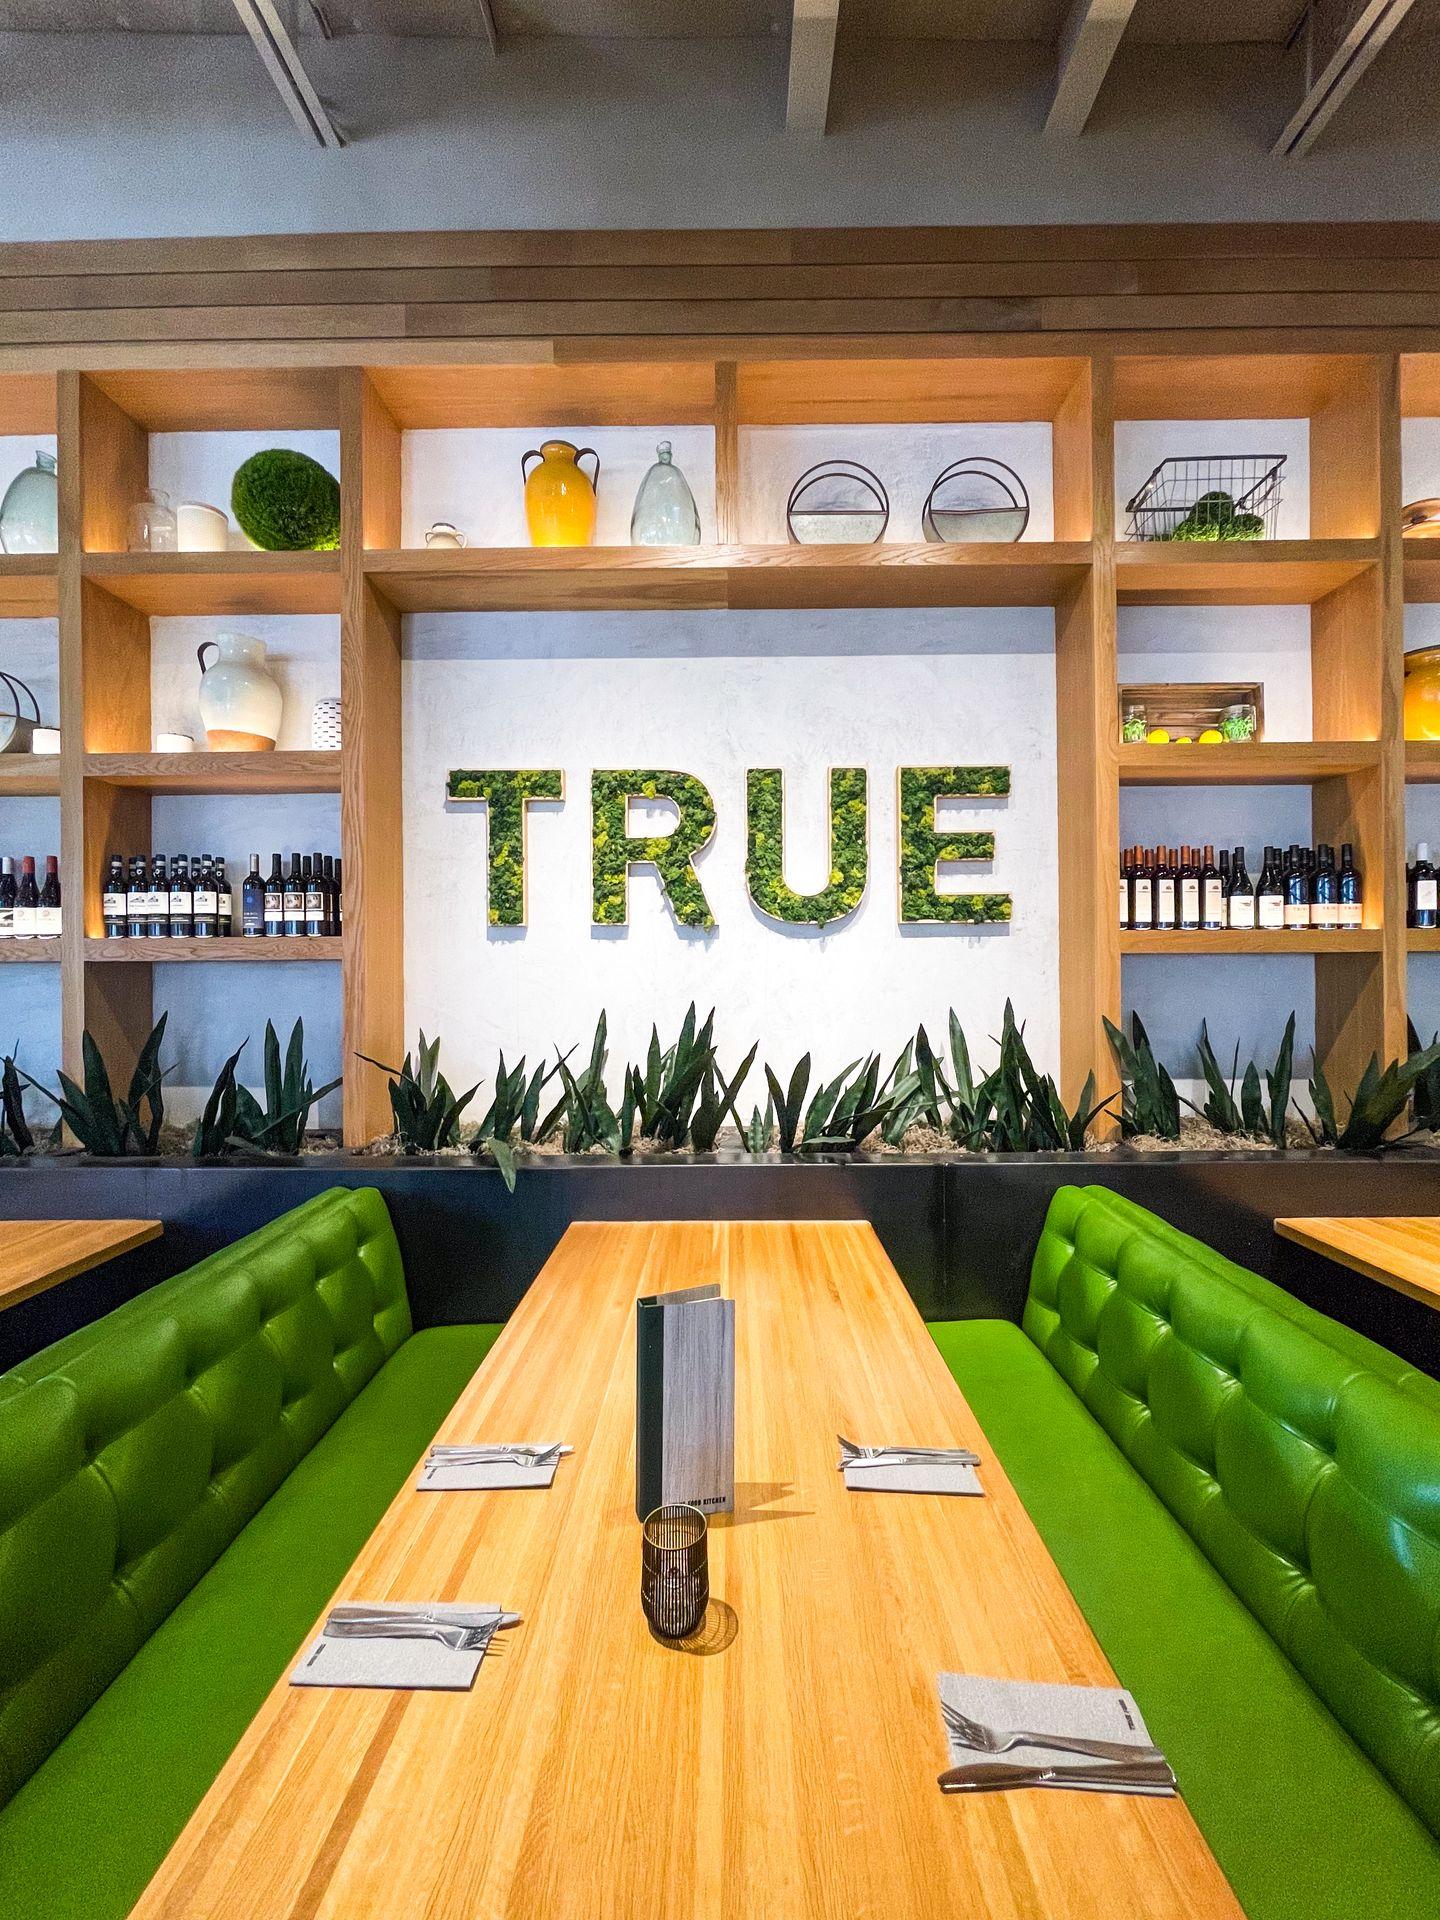 A view of the interior of True Food Kitchen - the word 'true' made of greenery is on a white wall and surrounded by shelving